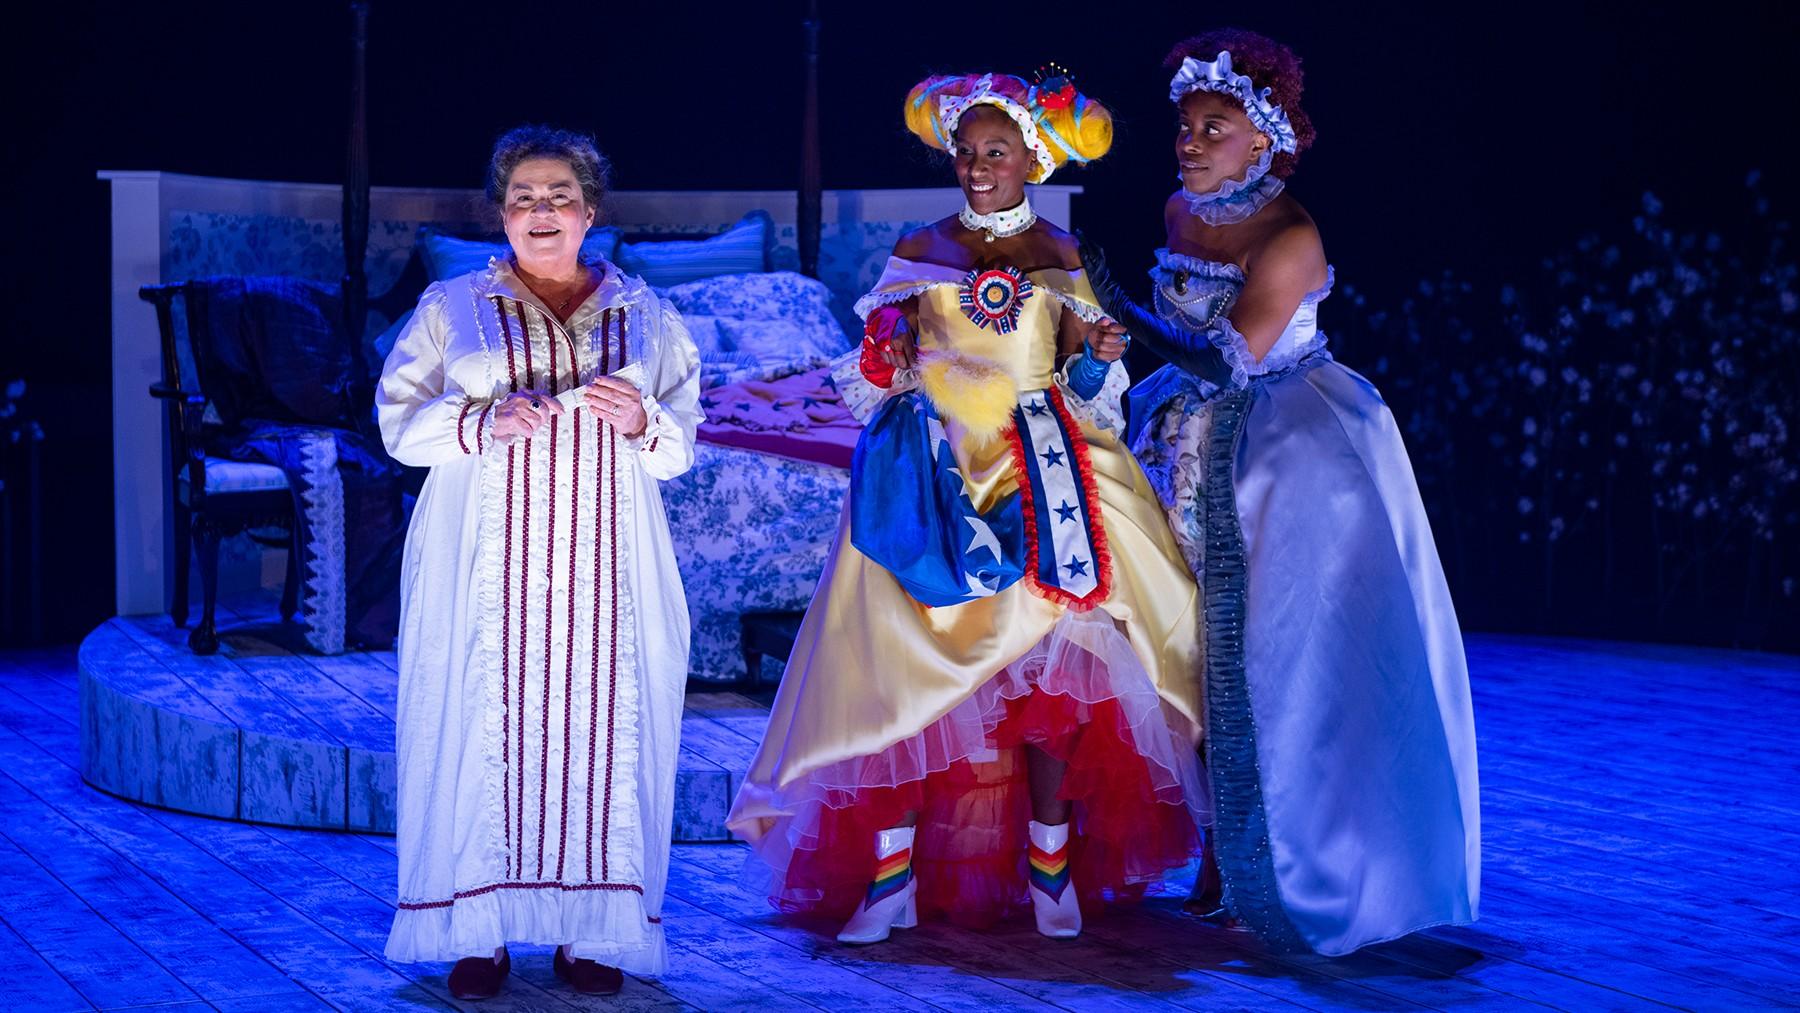 From left, Cindy Gold, Celeste M. Cooper and Sydney Charles in Steppenwolf Theatre’s “The Most Spectacularly Lamentable Trial of Miz Martha Washington” by James Ijames. (Credit: Michael Brosilow)